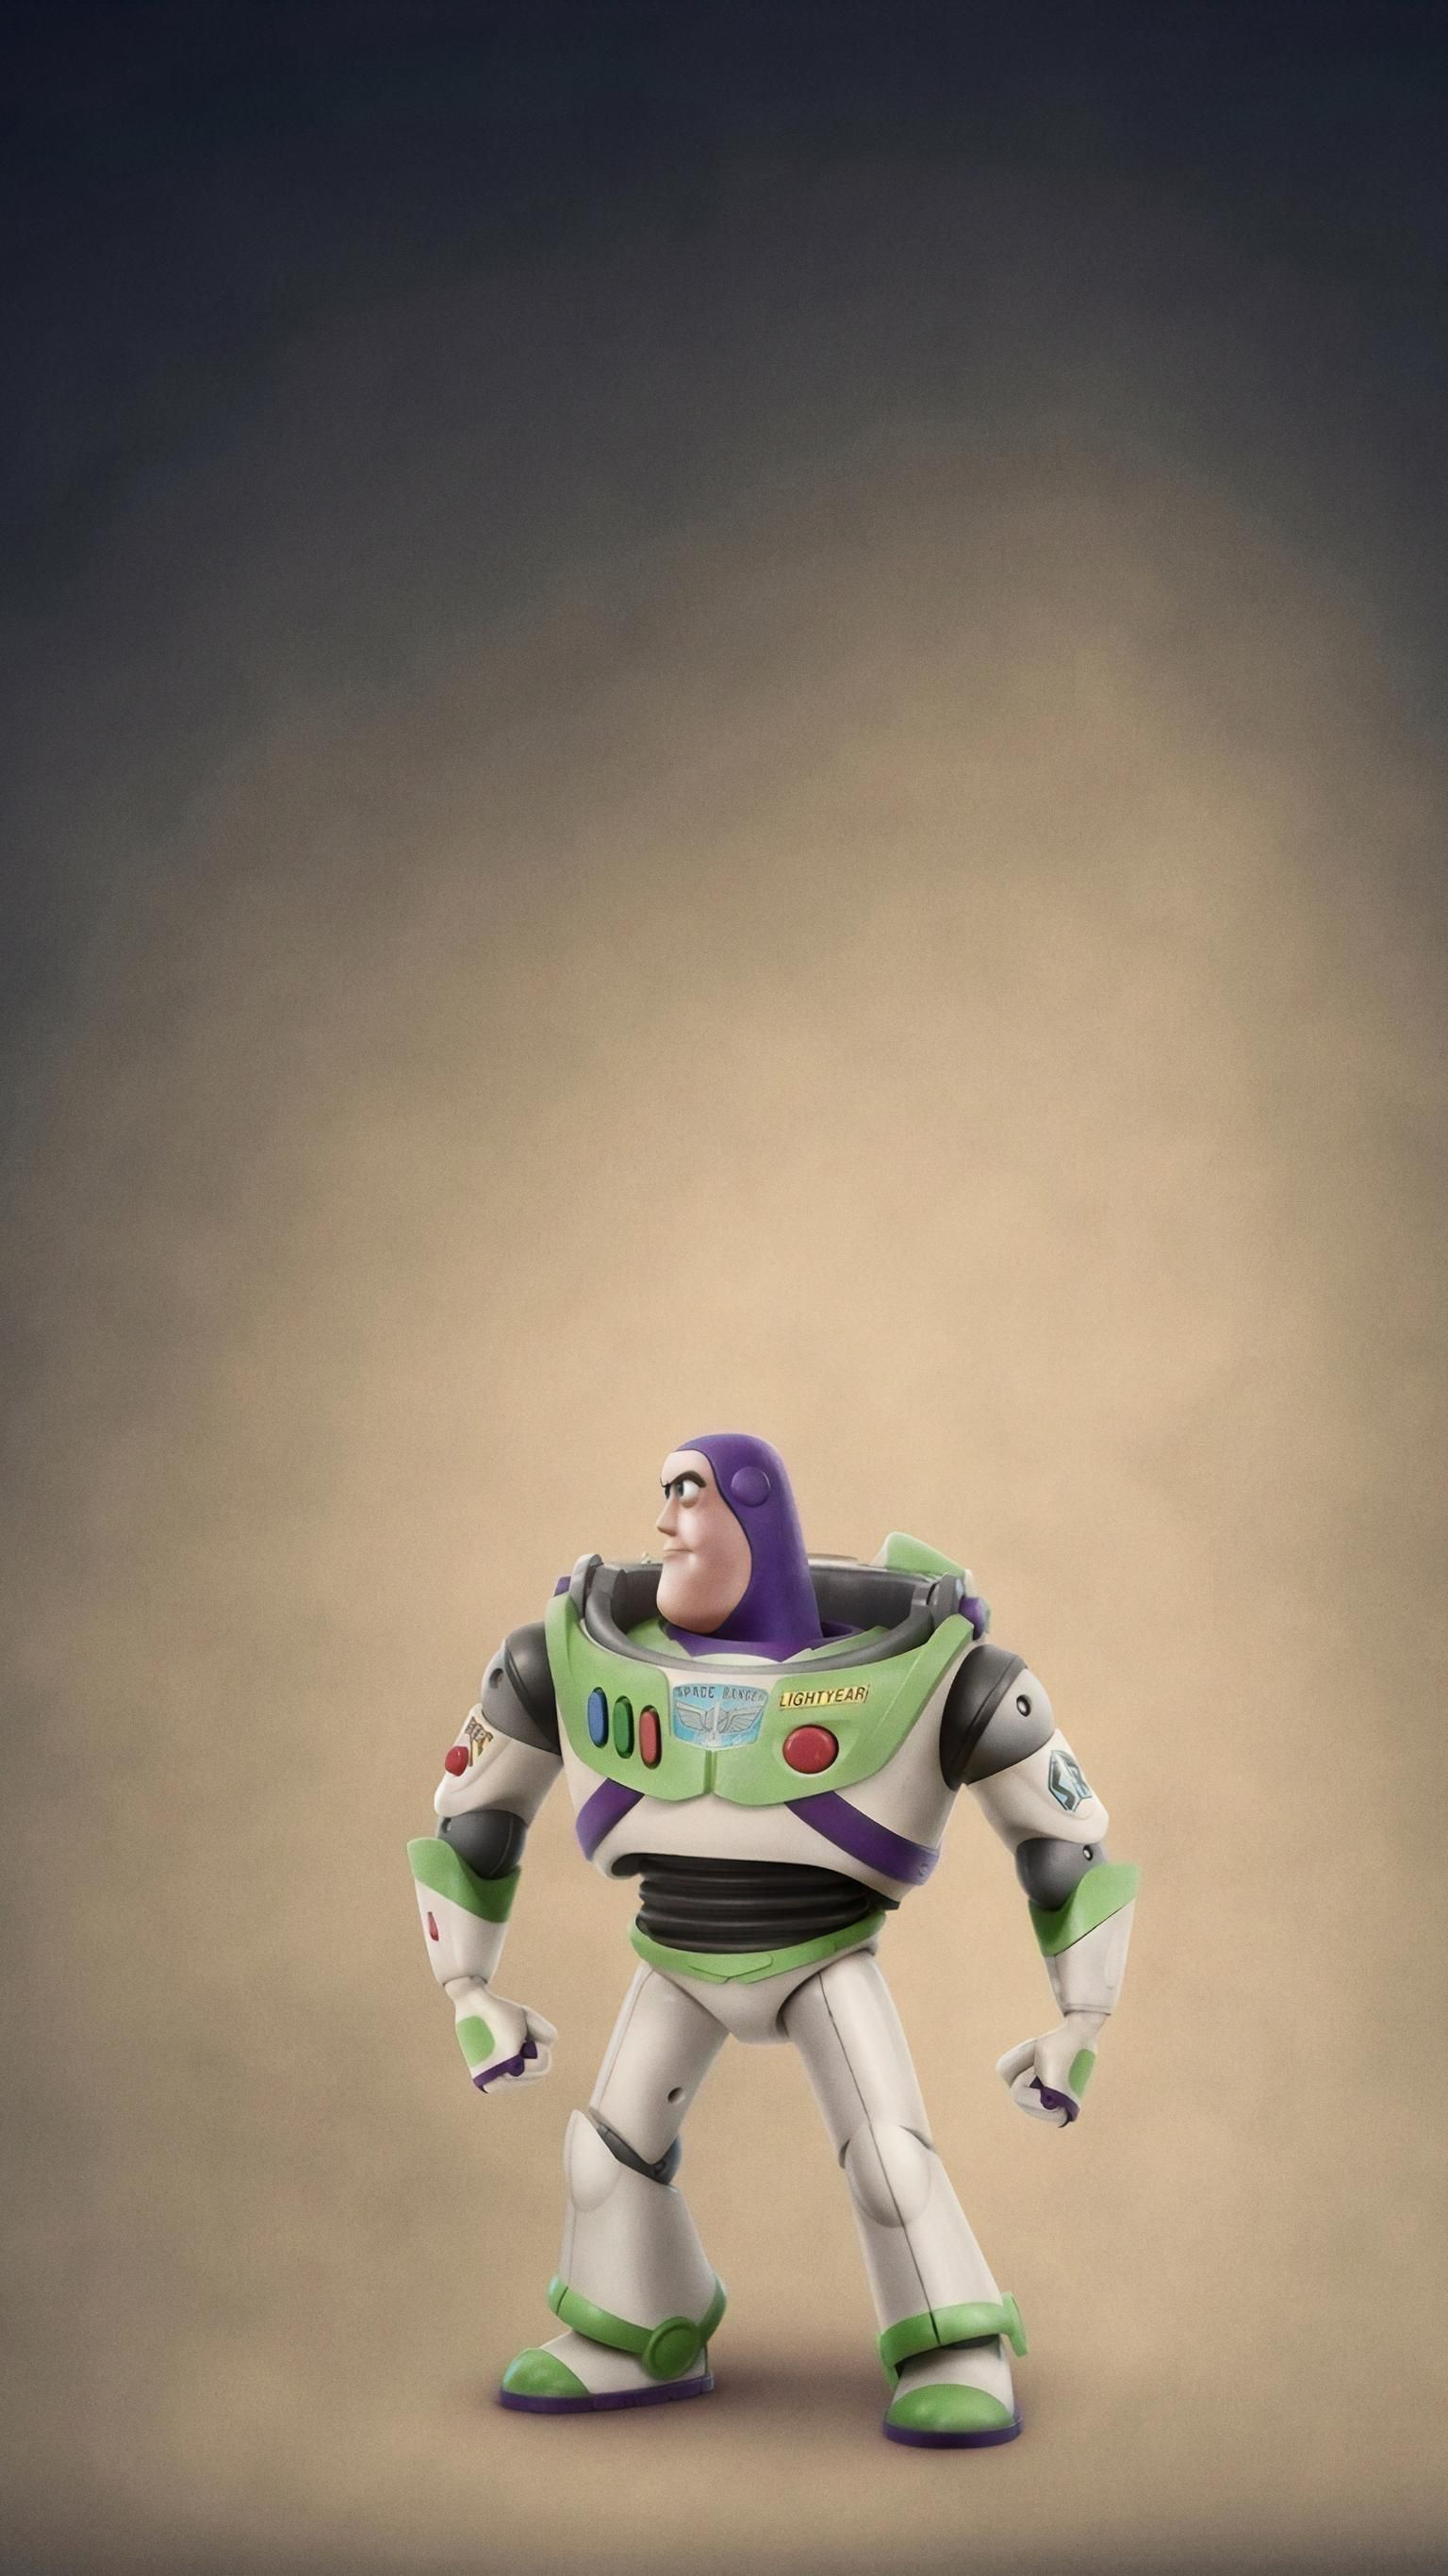 Free download Toy Story 4 2019 Phone Wallpaper in 2019 I PAD Movie